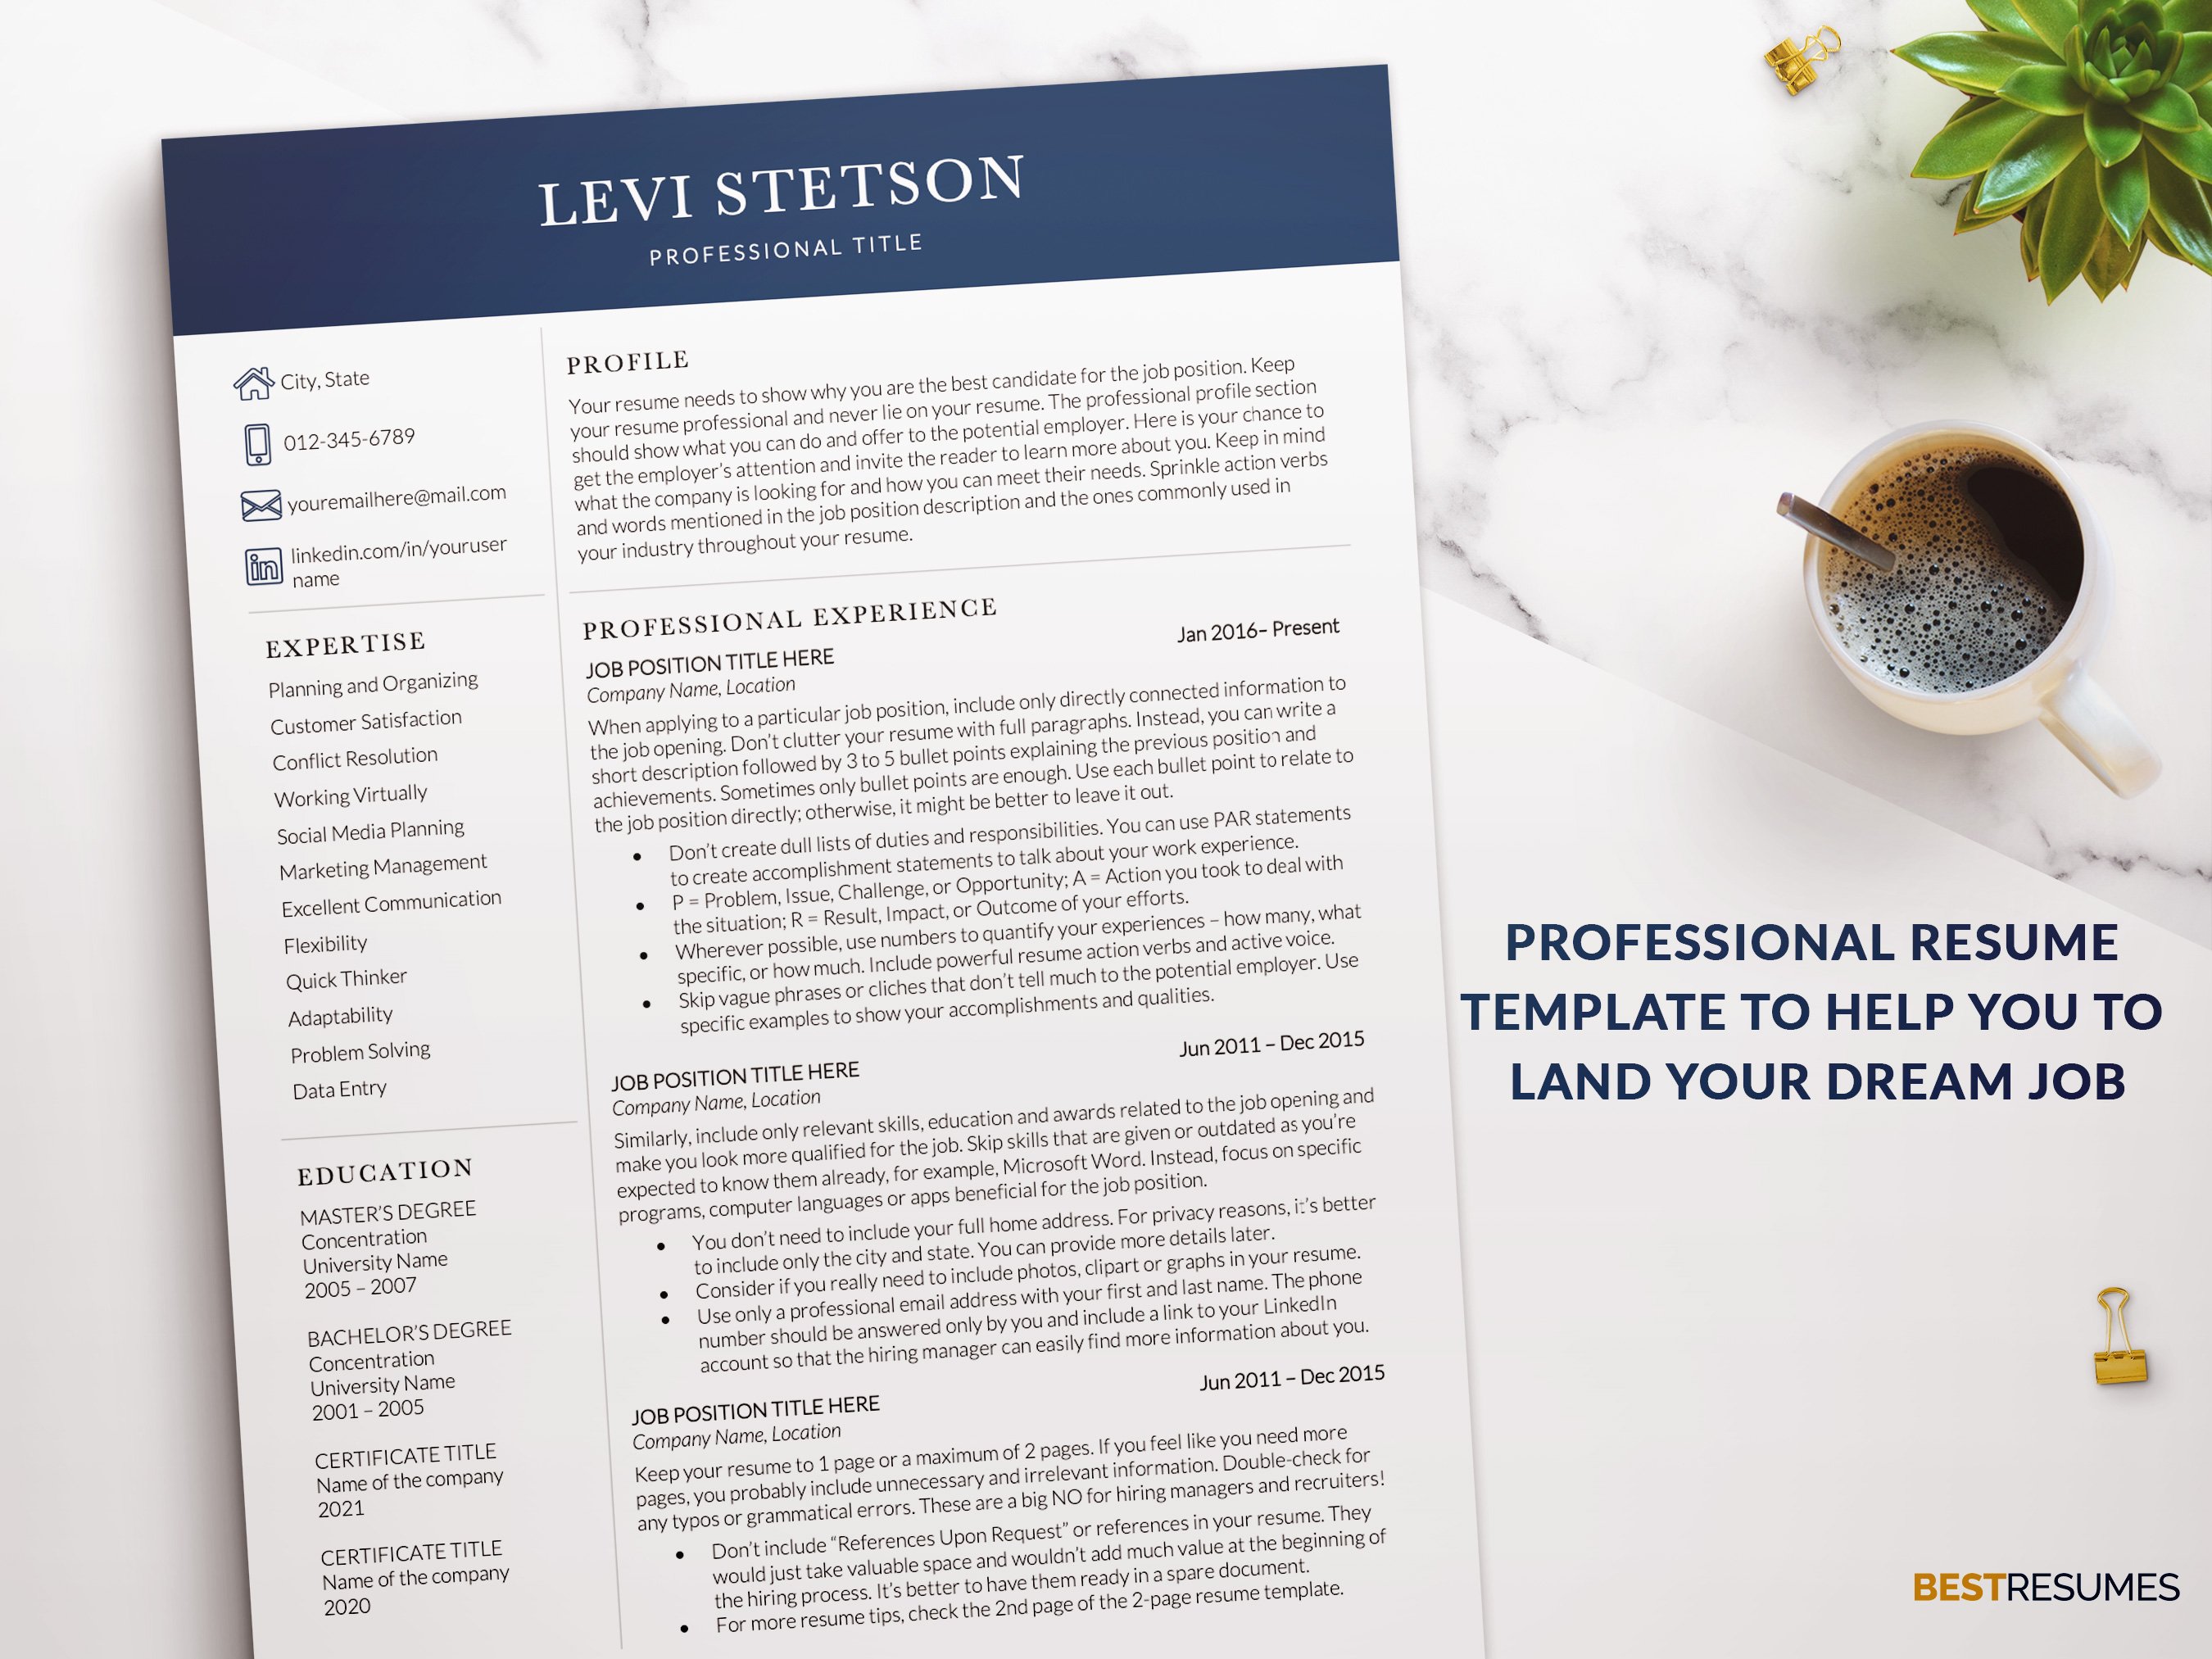 resume template word 1 page resume levi stetson 725